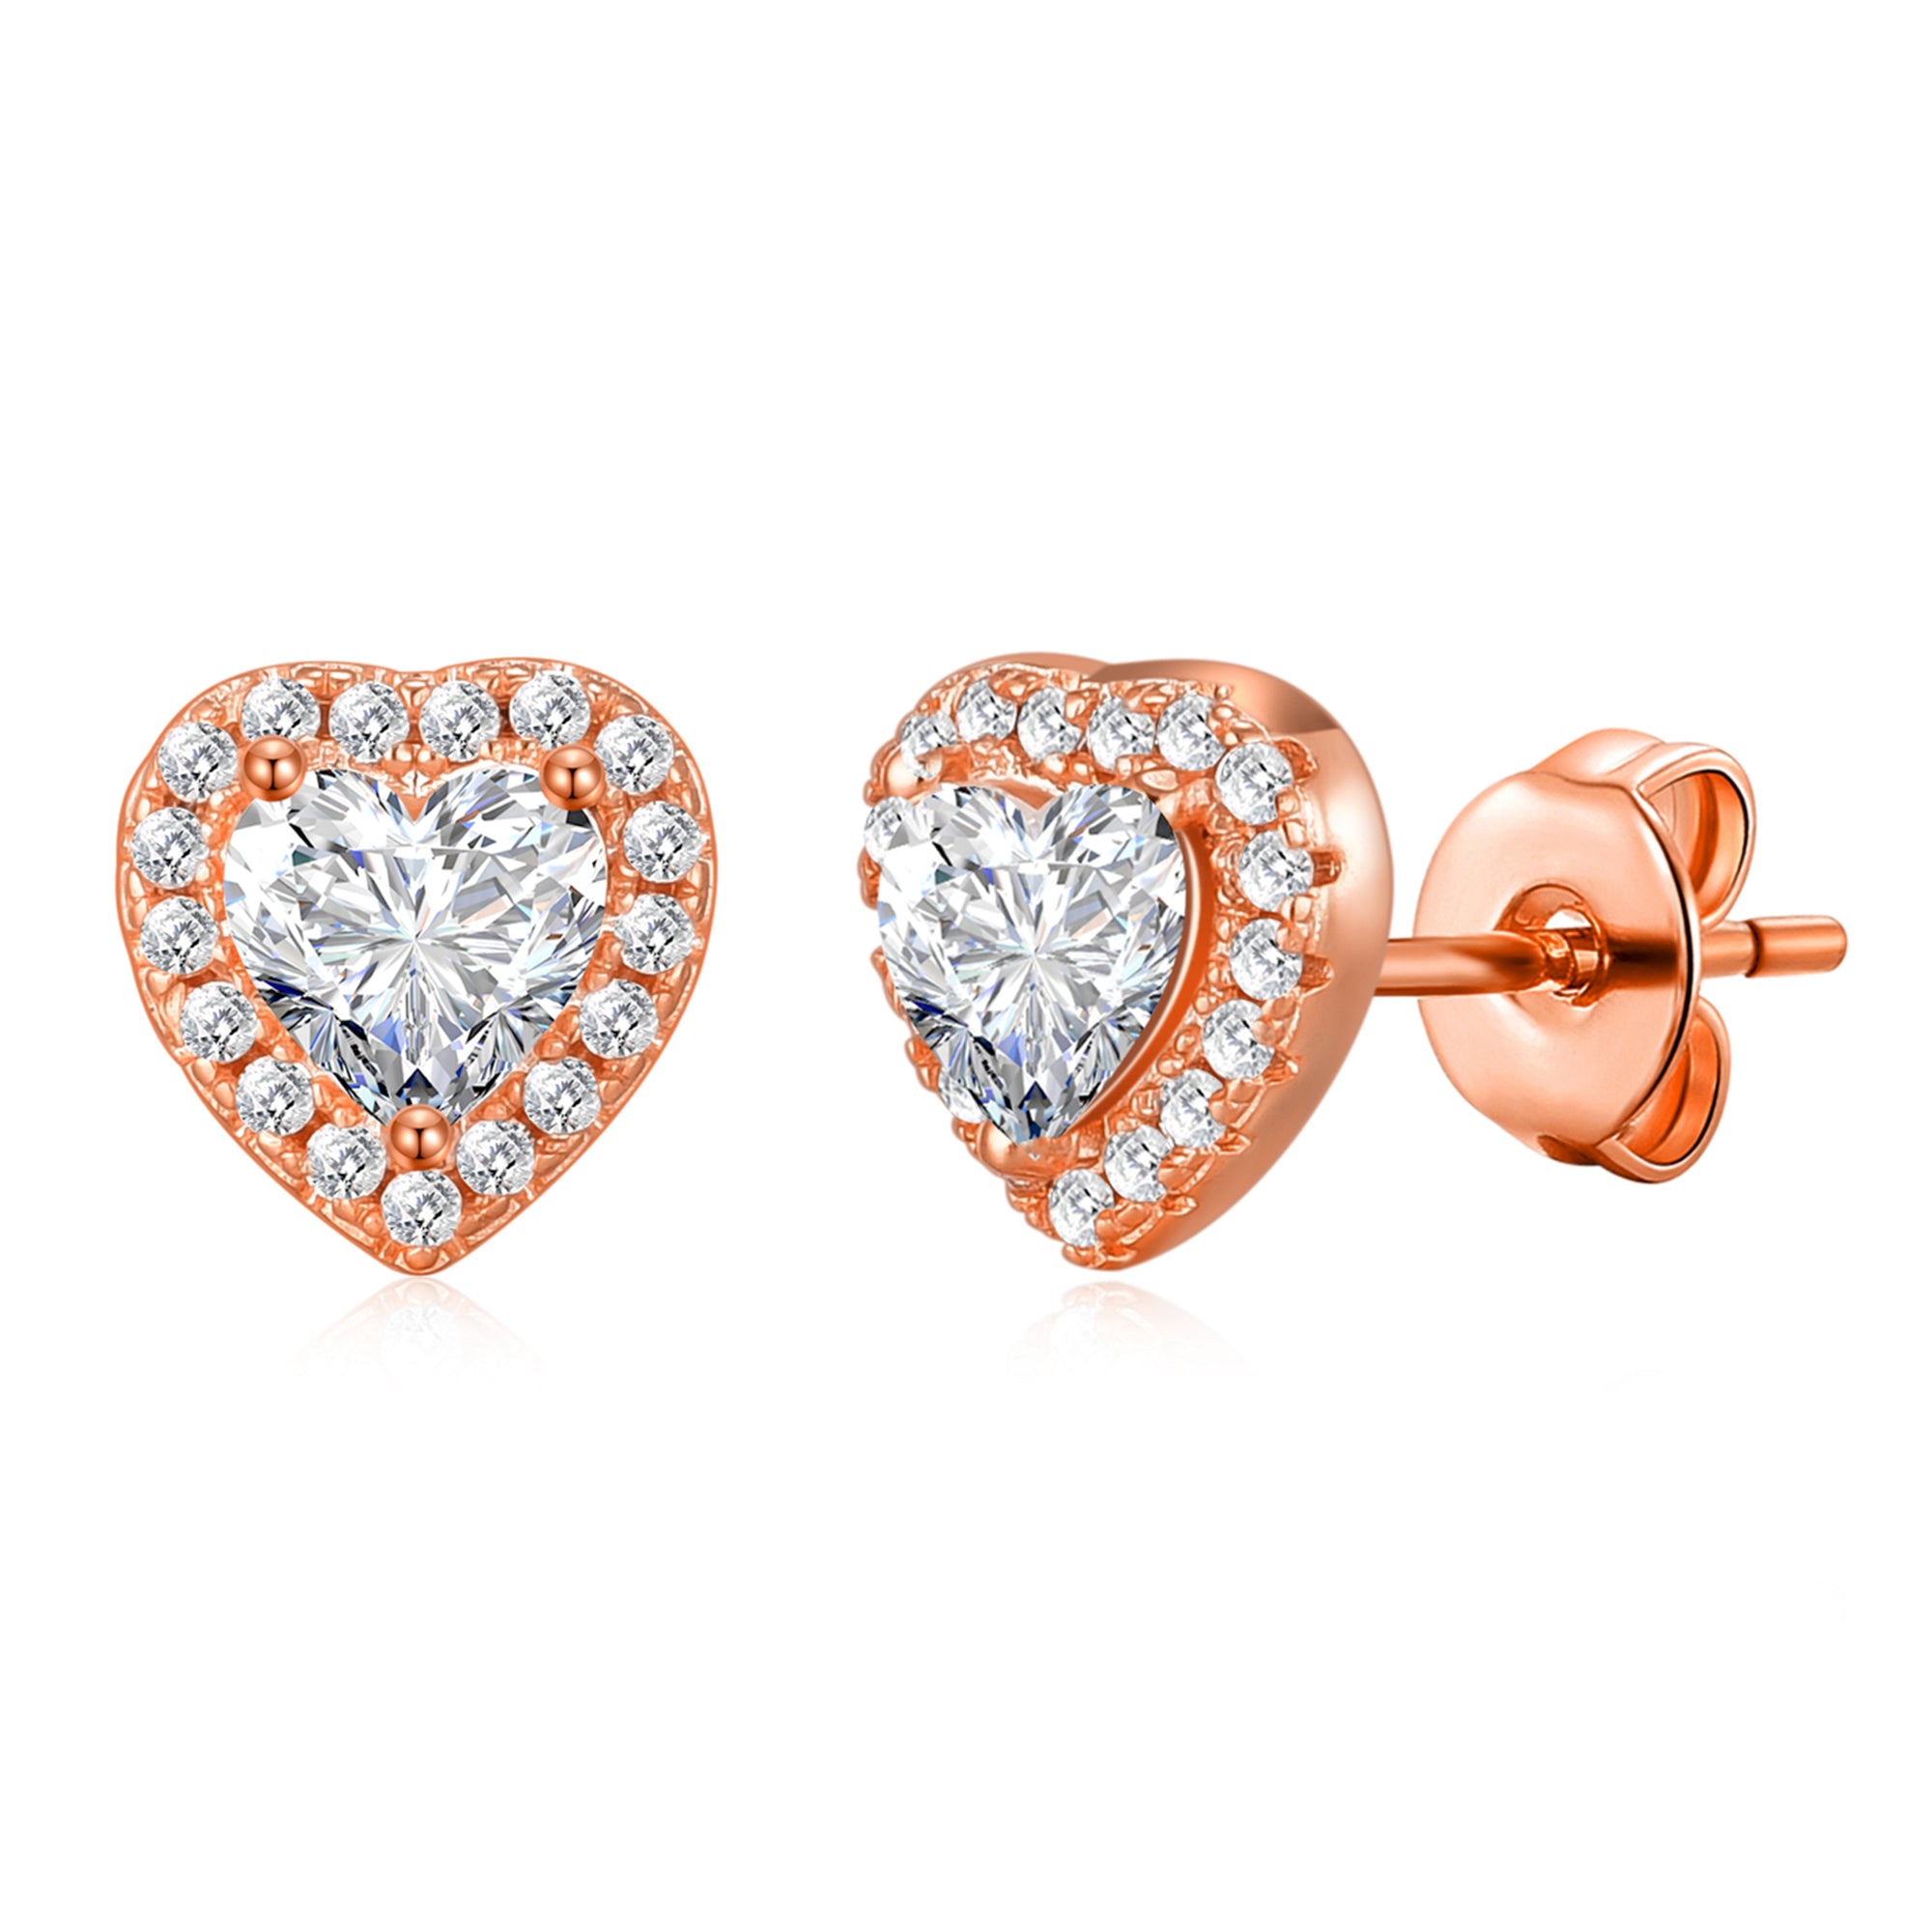 Rose Gold Plated Heart Halo Earrings Created with Zircondia® Crystals by Philip Jones Jewellery